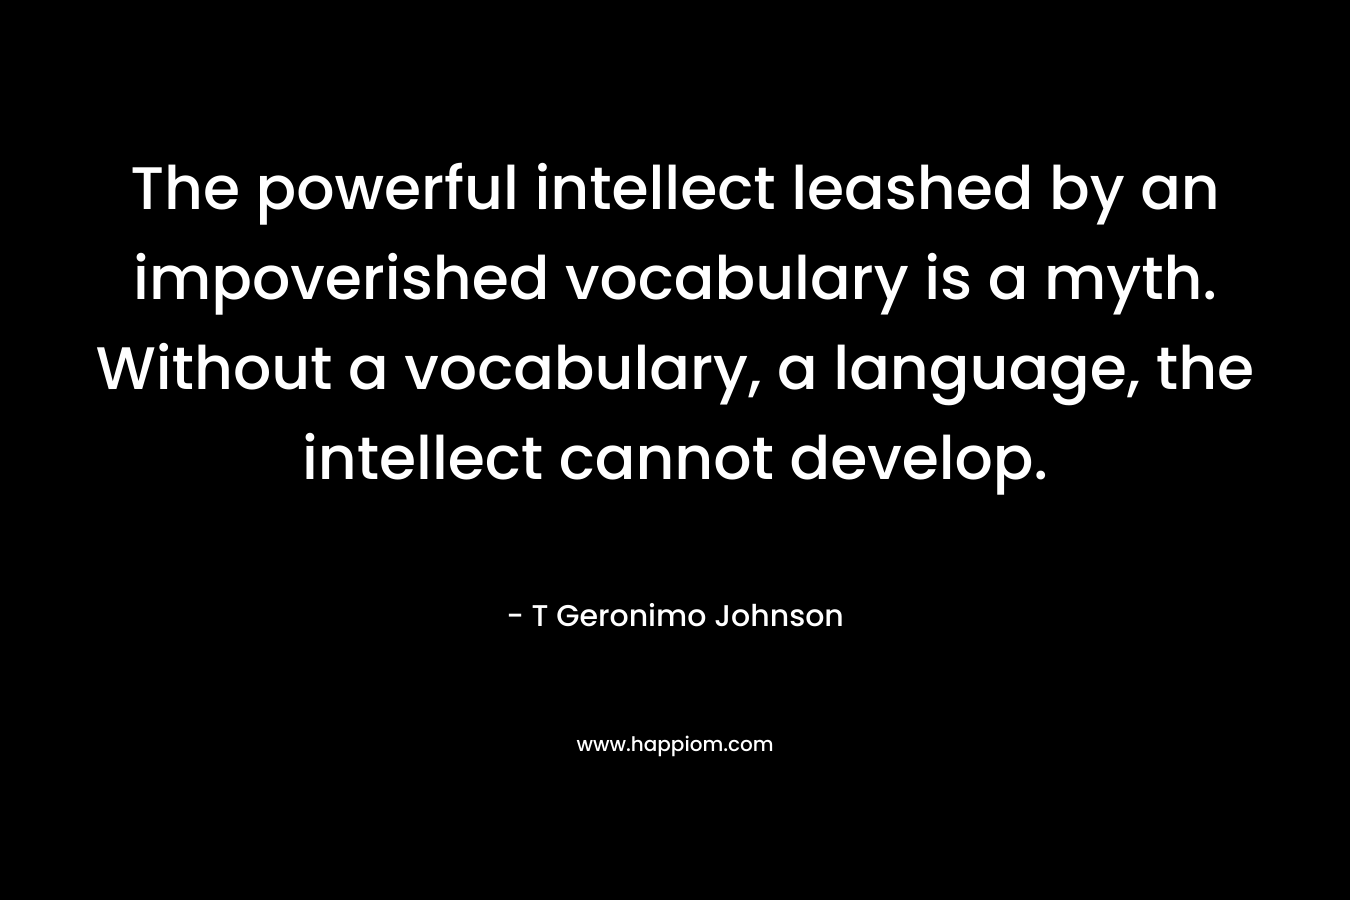 The powerful intellect leashed by an impoverished vocabulary is a myth. Without a vocabulary, a language, the intellect cannot develop.